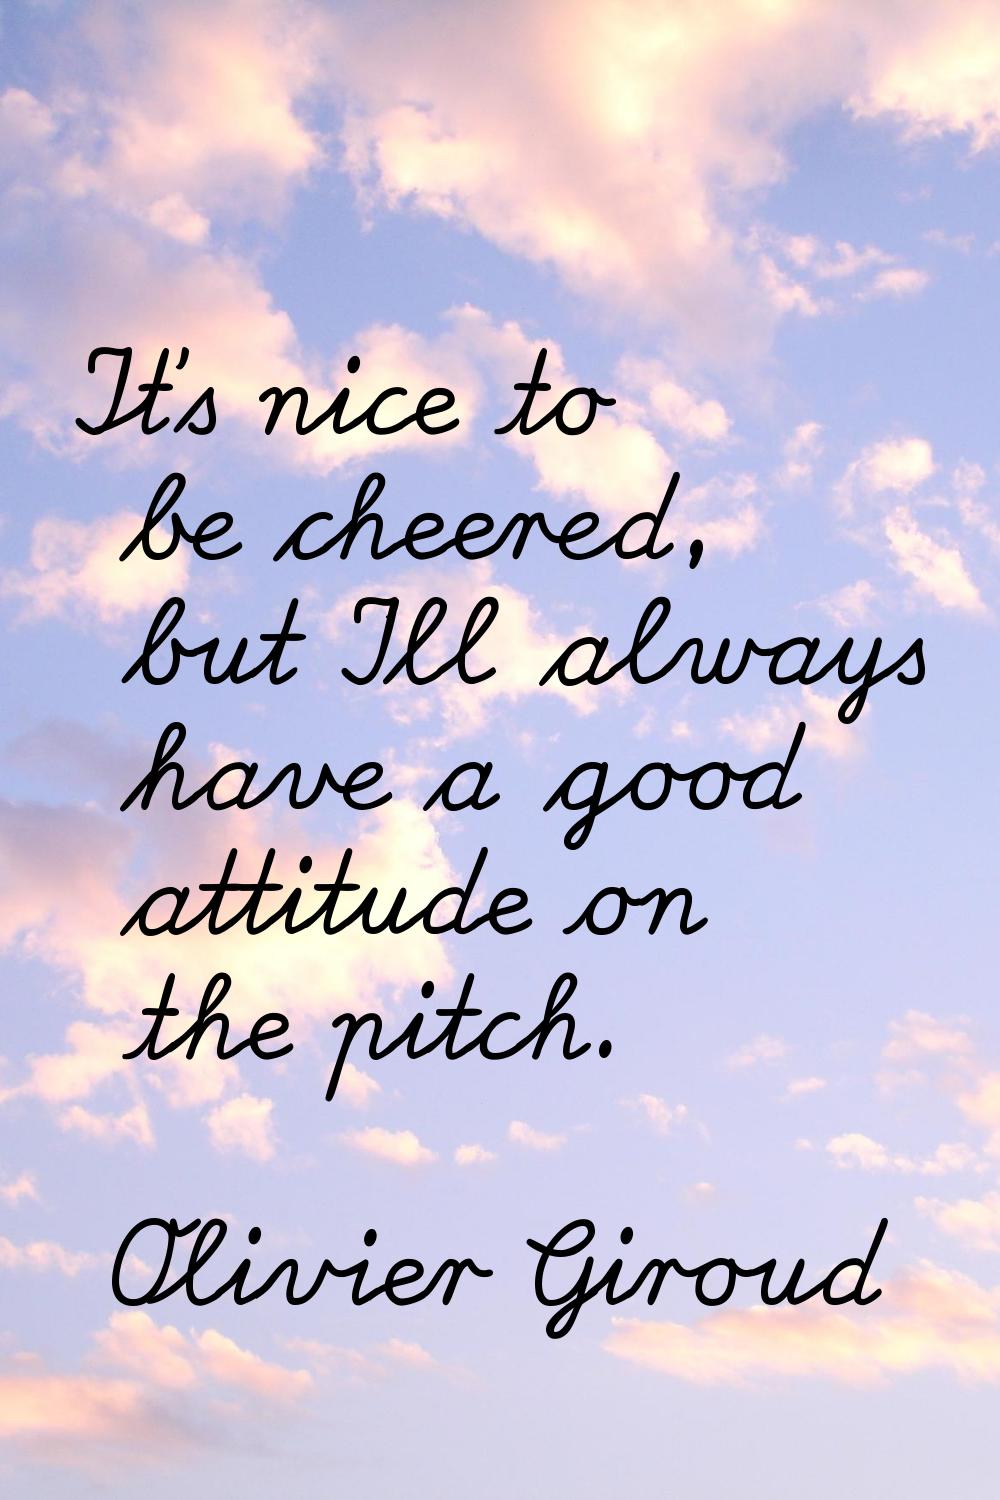 It's nice to be cheered, but I'll always have a good attitude on the pitch.